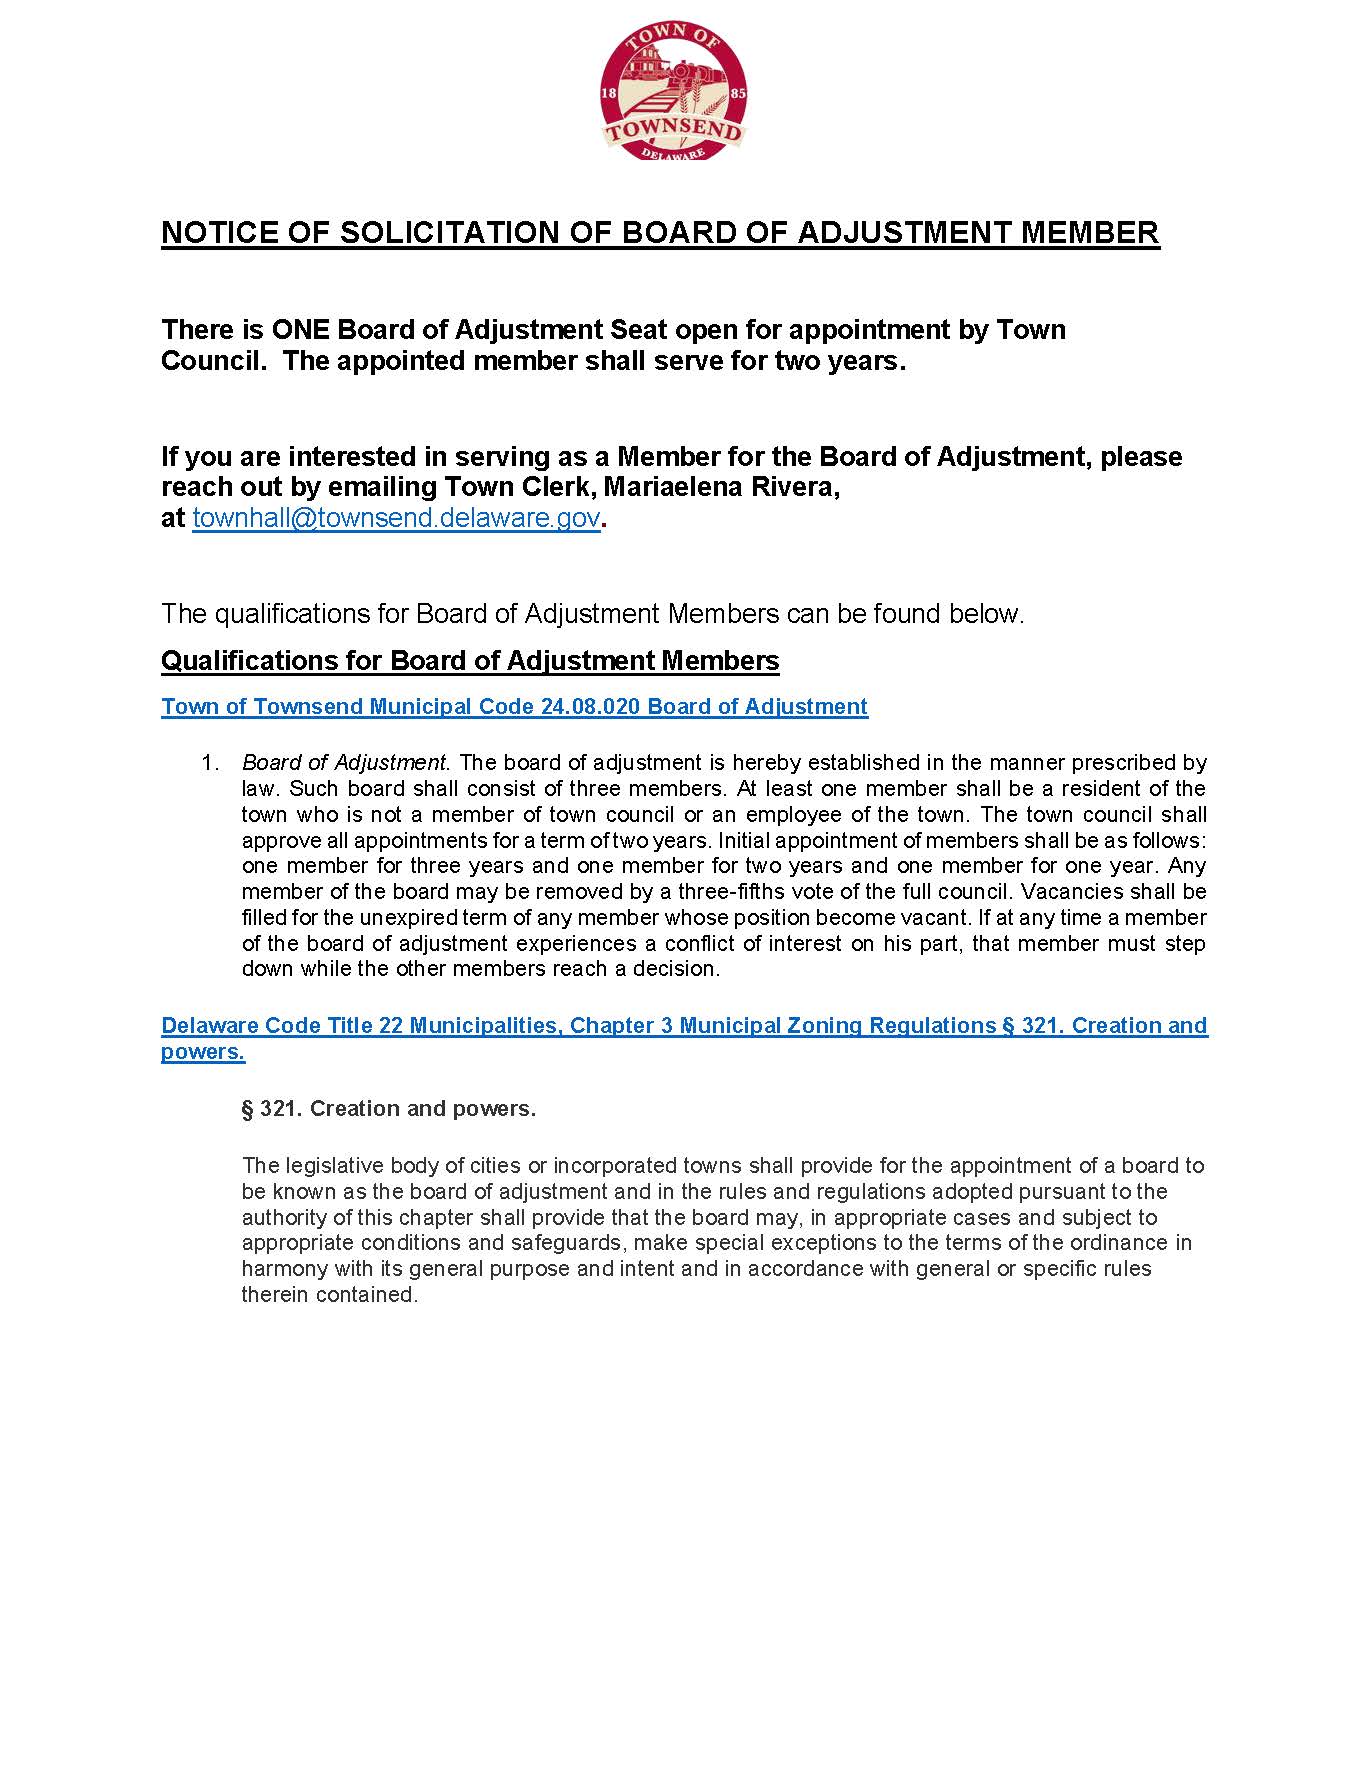 NOTICE OF SOLICITATION OF BOARD OF ADJUSTMENT MEMBER There is ONE Board of Adjustment Seat open for appointment by Town Council. The appointed member shall serve for two years. If you are interested in serving as a Member for the Board of Adjustment, please reach out by emailing Town Clerk, Mariaelena Rivera, at townhall@townsend.delaware.gov. The qualifications for Board of Adjustment Members can be found below. Qualifications for Board of Adjustment Members Town of Townsend Municipal Code 24.08.020 Board of Adjustment 1. Board of Adjustment. The board of adjustment is hereby established in the manner prescribed by law. Such board shall consist of three members. At least one member shall be a resident of the town who is not a member of town council or an employee of the town. The town council shall approve all appointments for a term of two years. Initial appointment of members shall be as follows: one member for three years and one member for two years and one member for one year. Any member of the board may be removed by a three-fifths vote of the full council. Vacancies shall be filled for the unexpired term of any member whose position become vacant. If at any time a member of the board of adjustment experiences a conflict of interest on his part, that member must step down while the other members reach a decision. Delaware Code Title 22 Municipalities, Chapter 3 Municipal Zoning Regulations § 321. Creation and powers. § 321. Creation and powers. The legislative body of cities or incorporated towns shall provide for the appointment of a board to be known as the board of adjustment and in the rules and regulations adopted pursuant to the authority of this chapter shall provide that the board may, in appropriate cases and subject to appropriate conditions and safeguards, make special exceptions to the terms of the ordinance in harmony with its general purpose and intent and in accordance with general or specific rules therein contained.